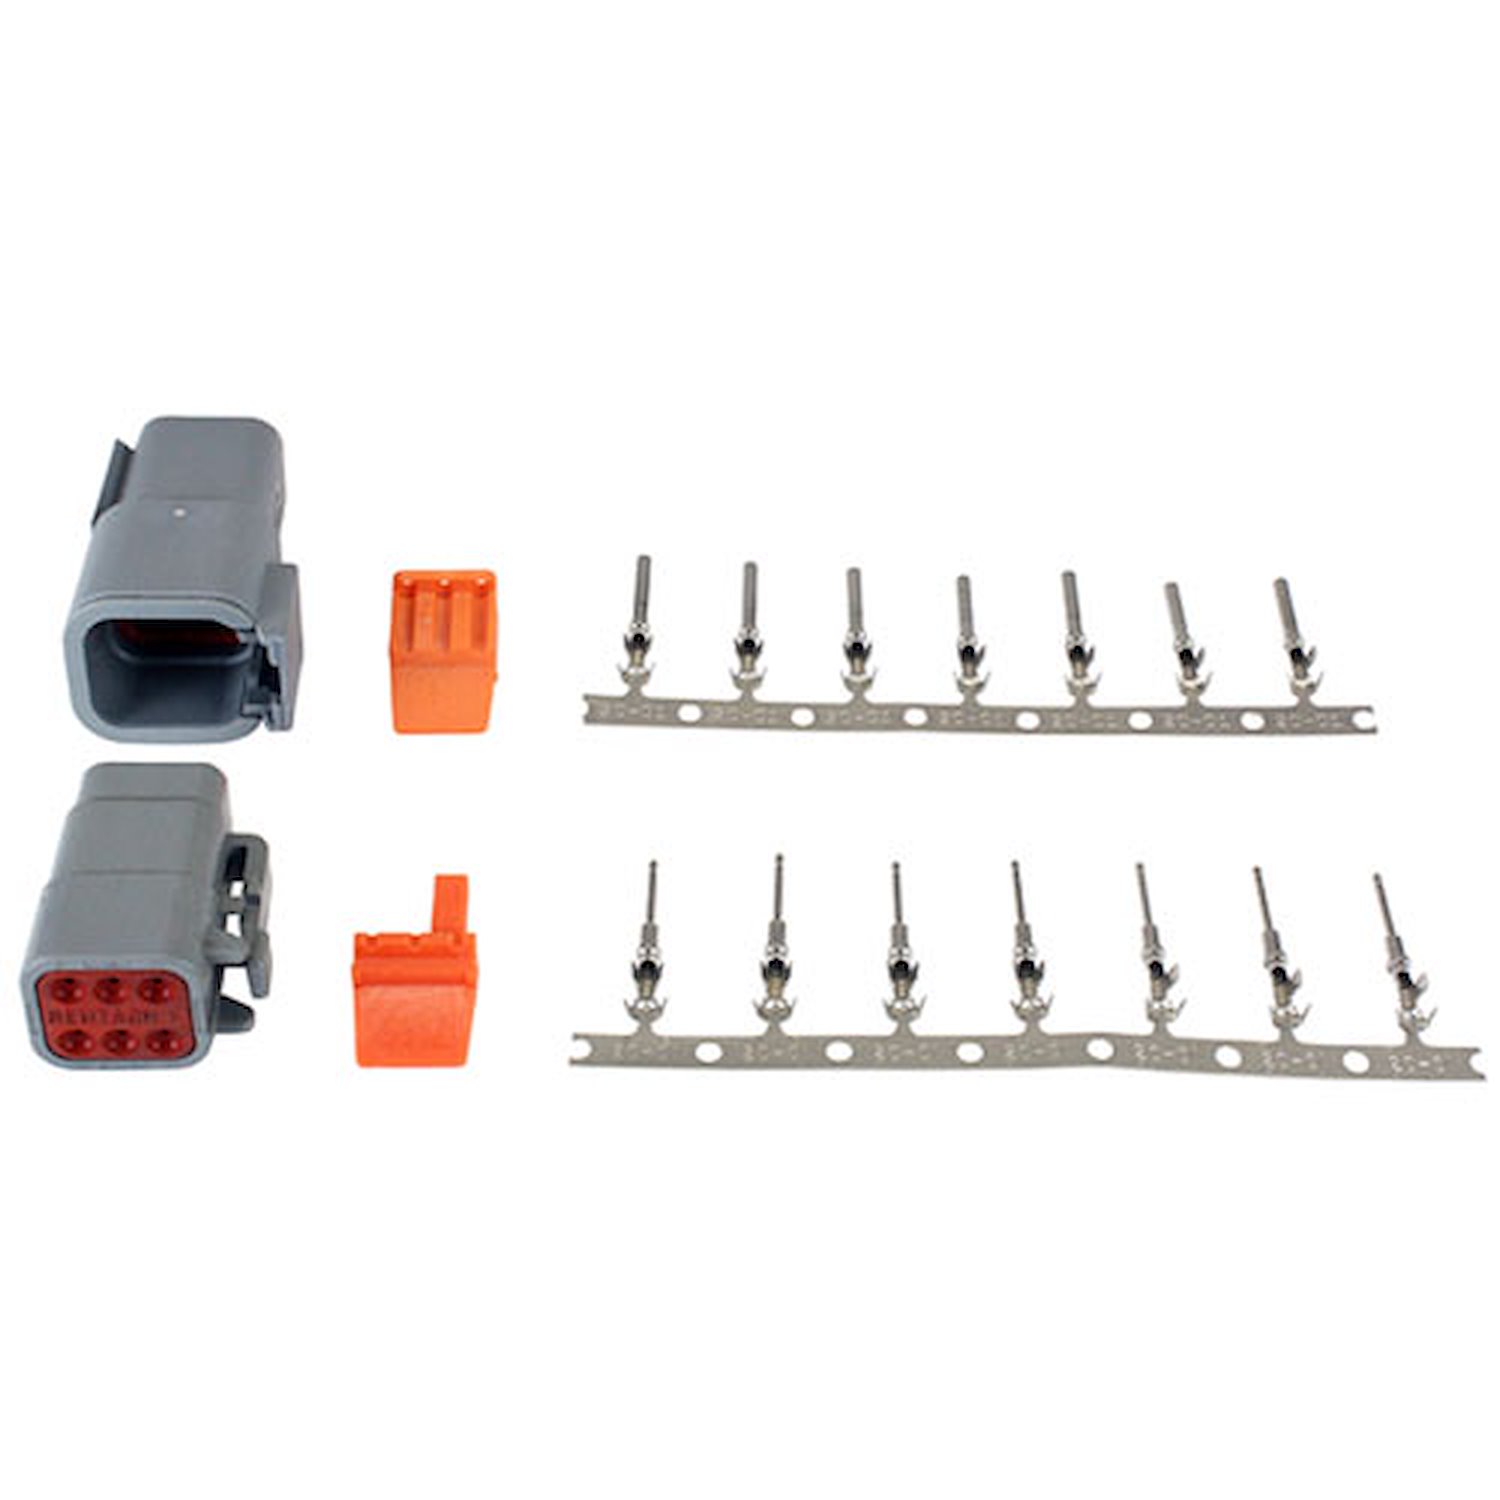 DTM-Style 6-Way Connector Kit Includes Plug, Receptacle, Plug Wedge Lock, Receptacle Wedge Lock, 7 Female Pins And 7 Male Pins